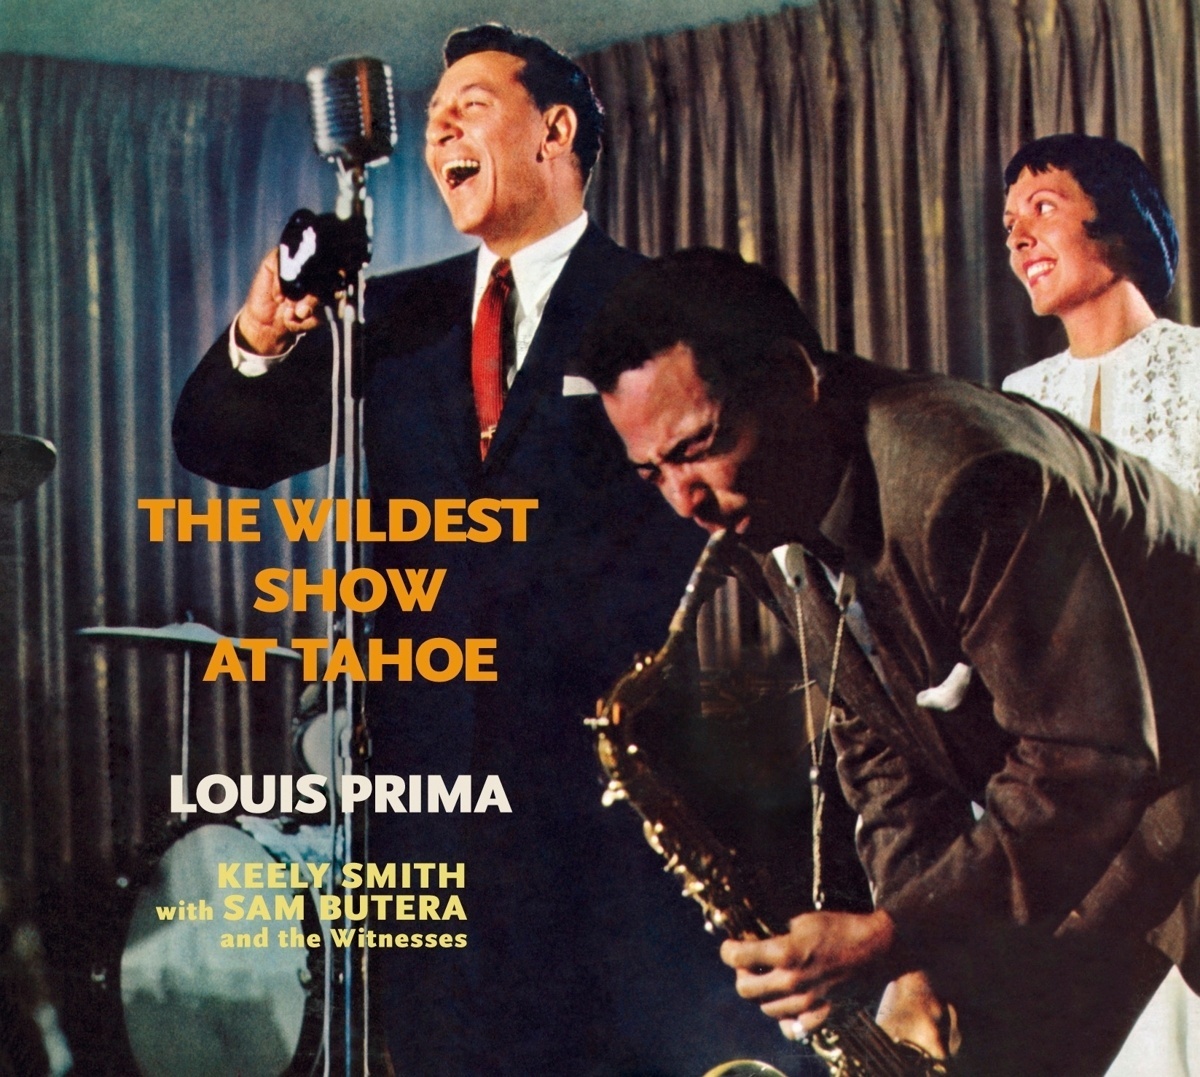 The Wildest Show At Tahoe+Strictly Prima!+4 Bo - Louis Prima & Smith Keely With Butera Sam & The Wi. (CD)